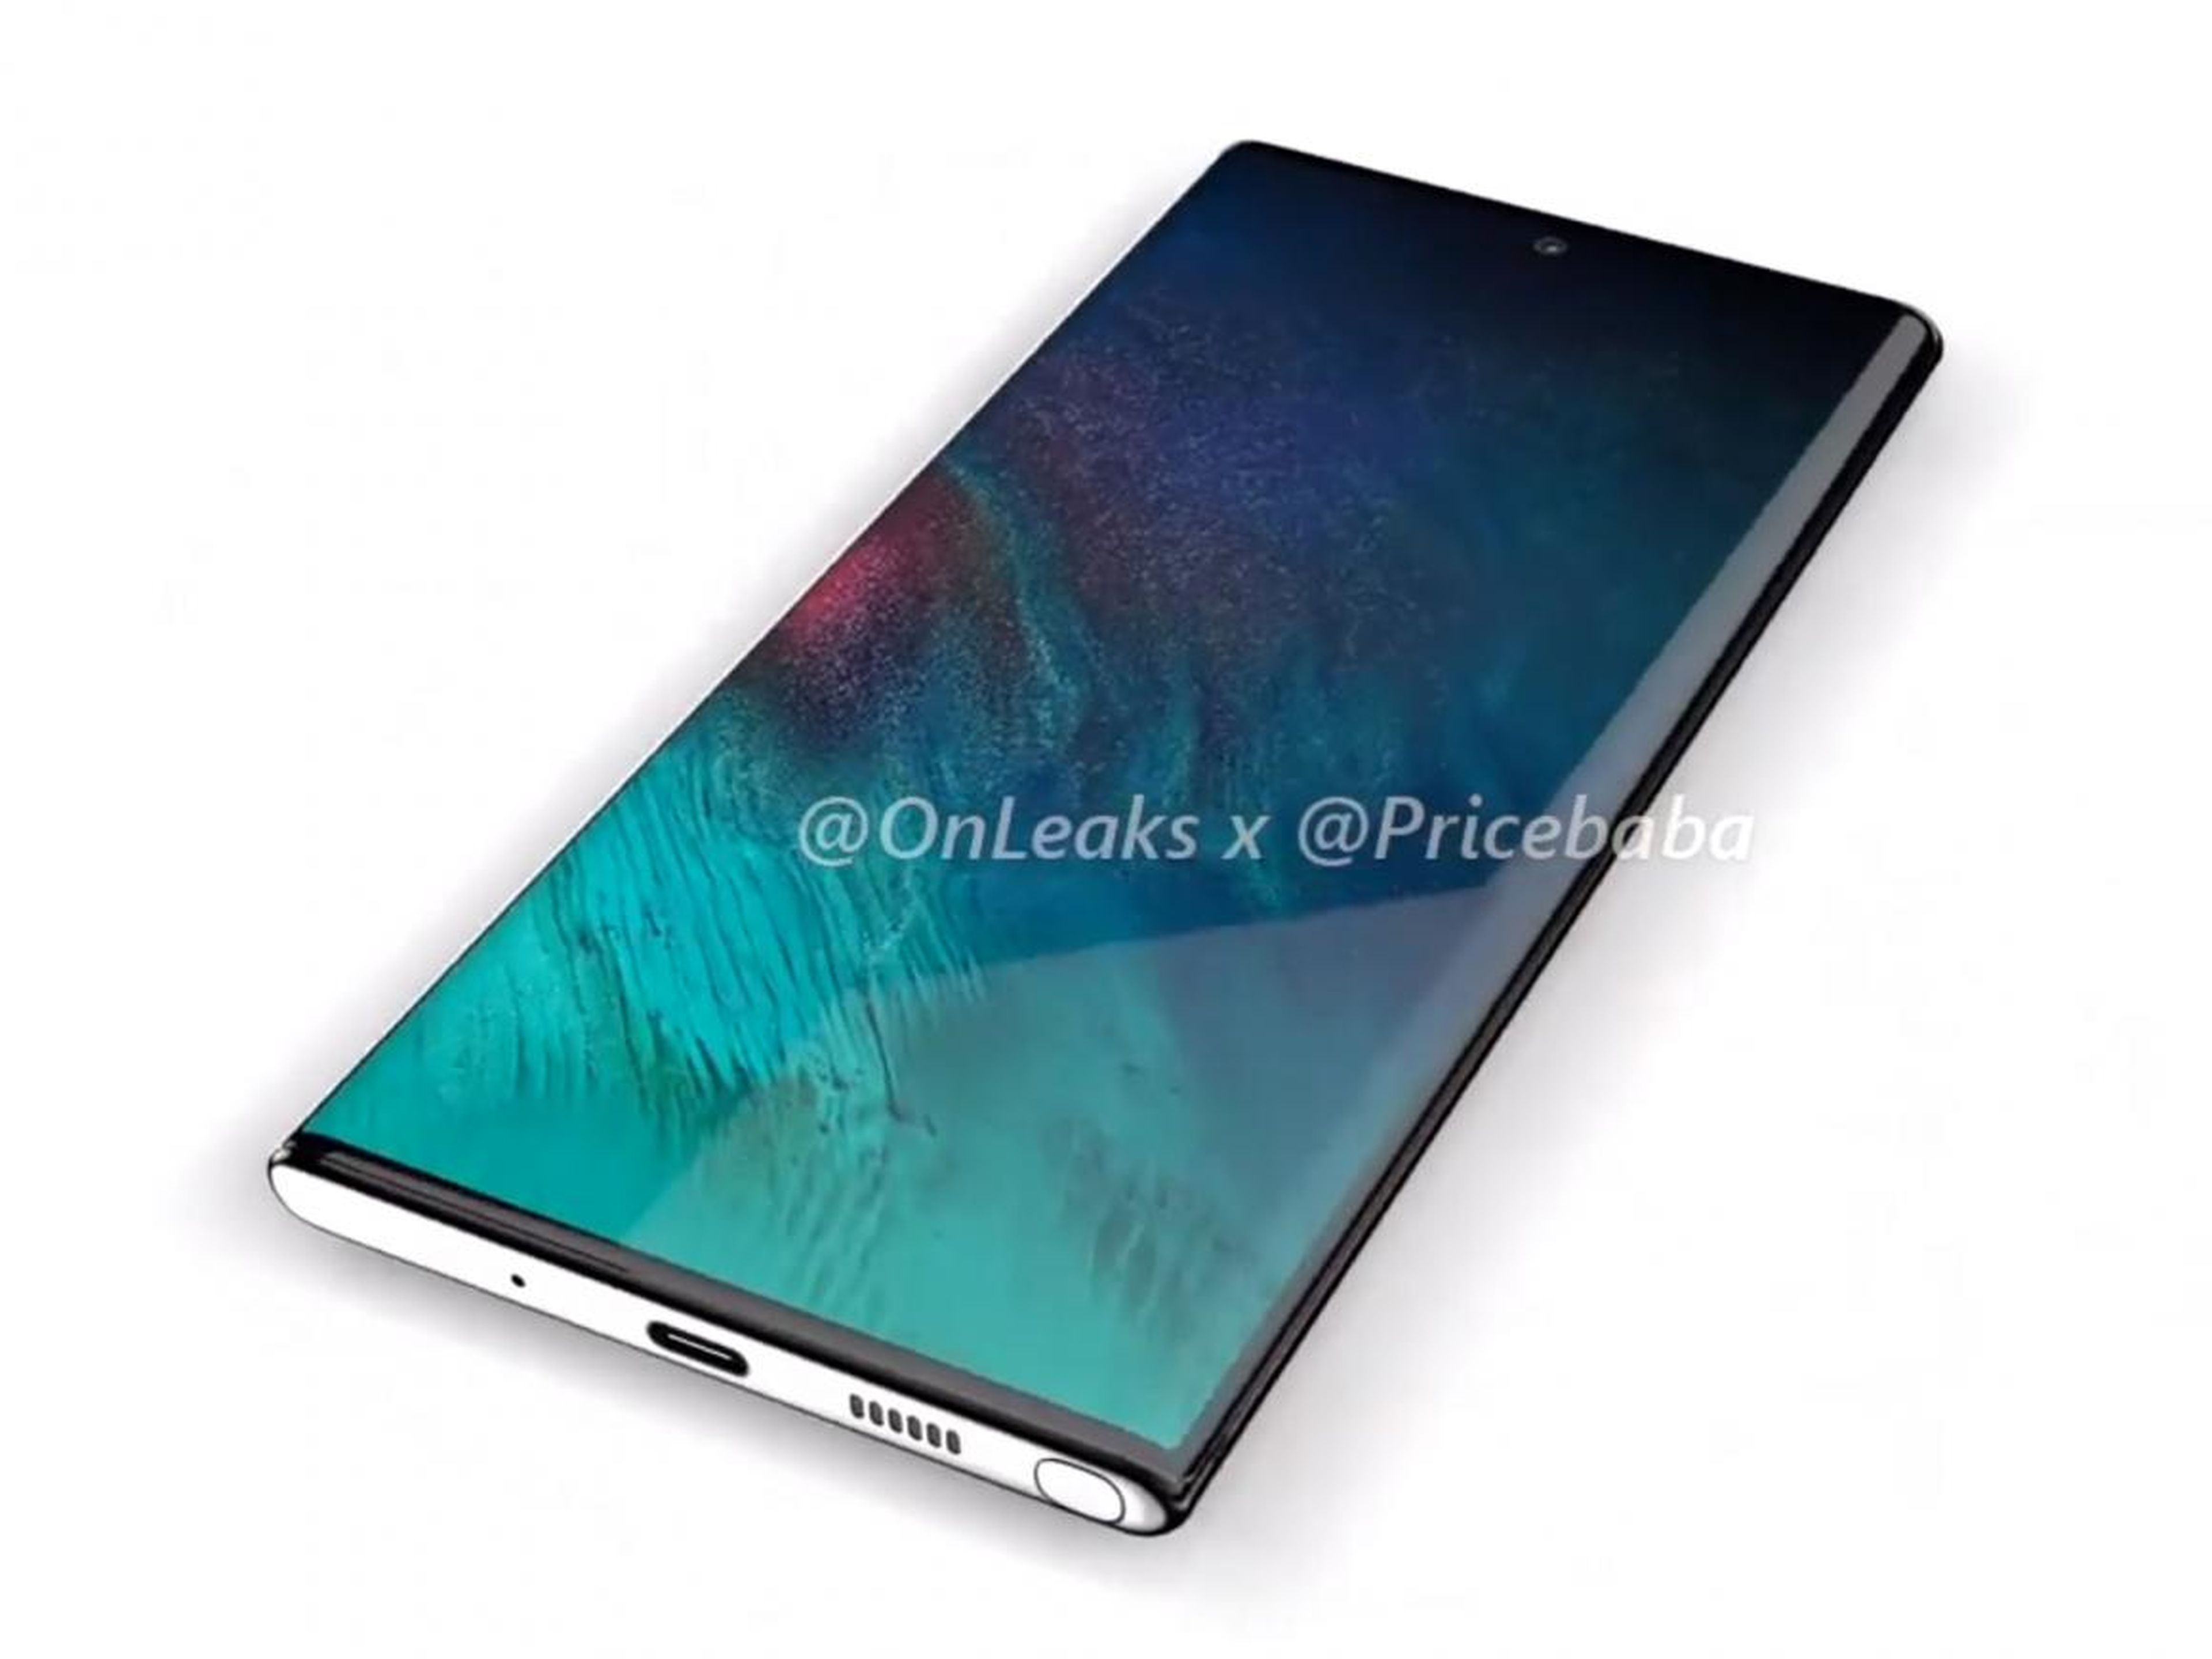 If you wait just a little while longer, you could get your hands on Samsung's new Galaxy Note 10, which will most likely be revealed on August 7.